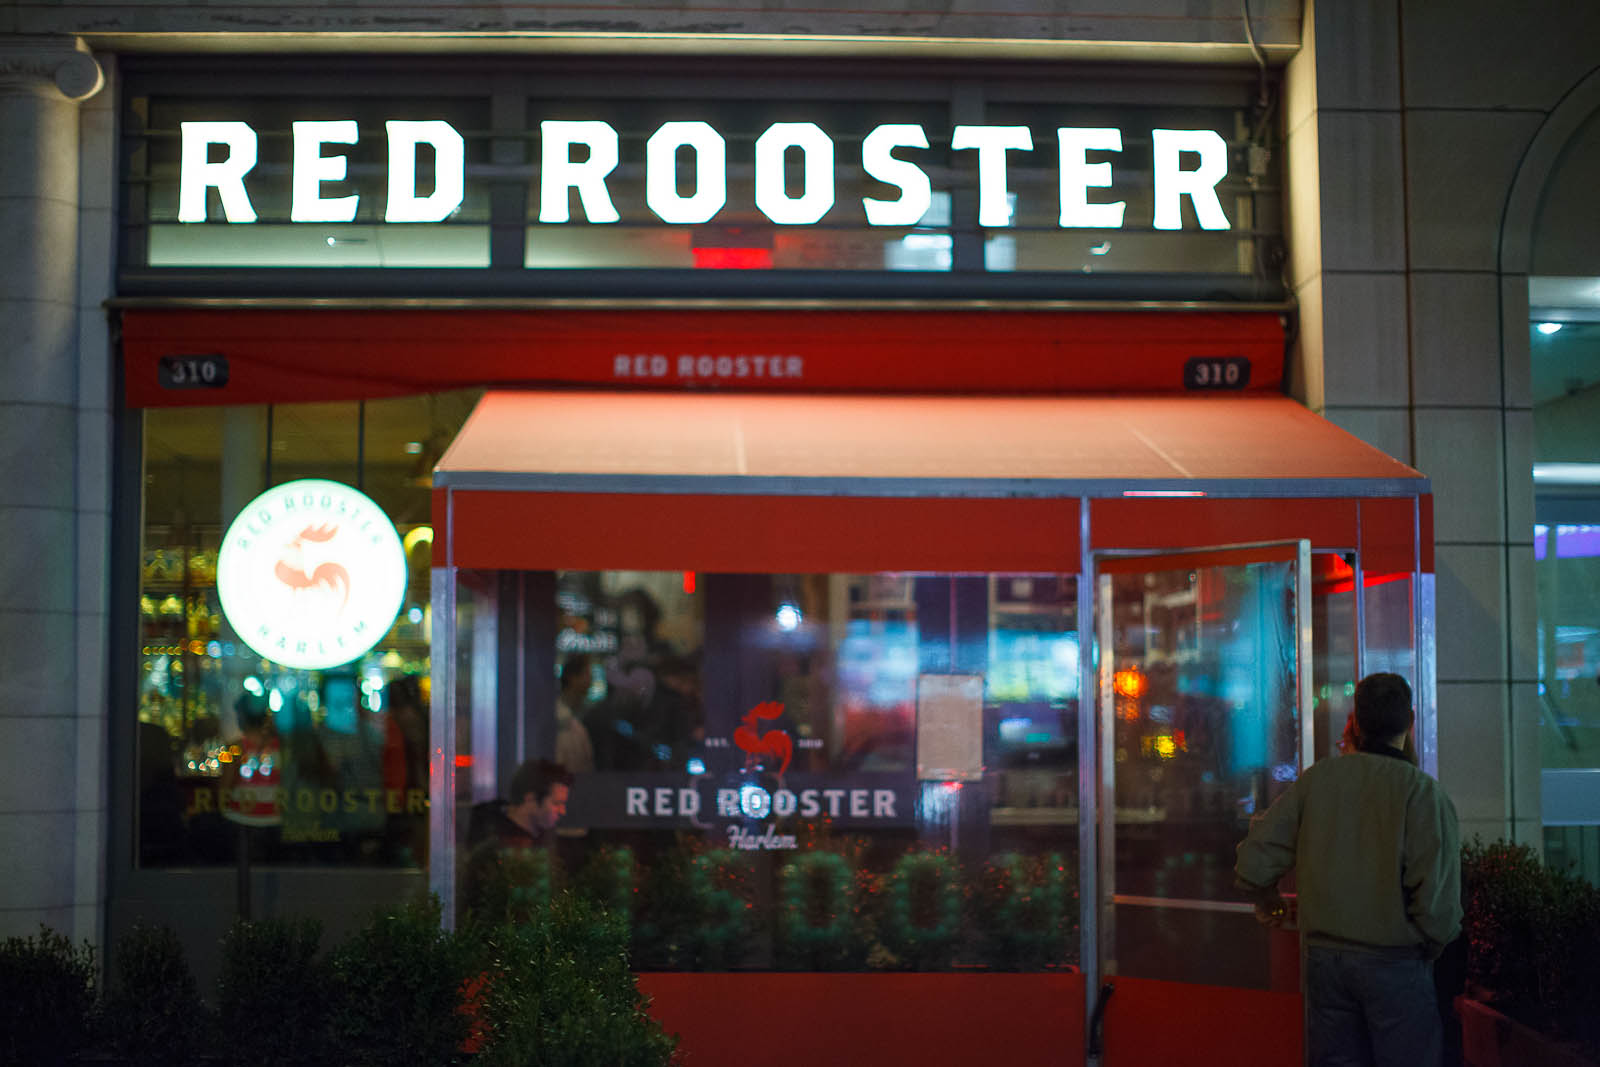 Red Rooster at night